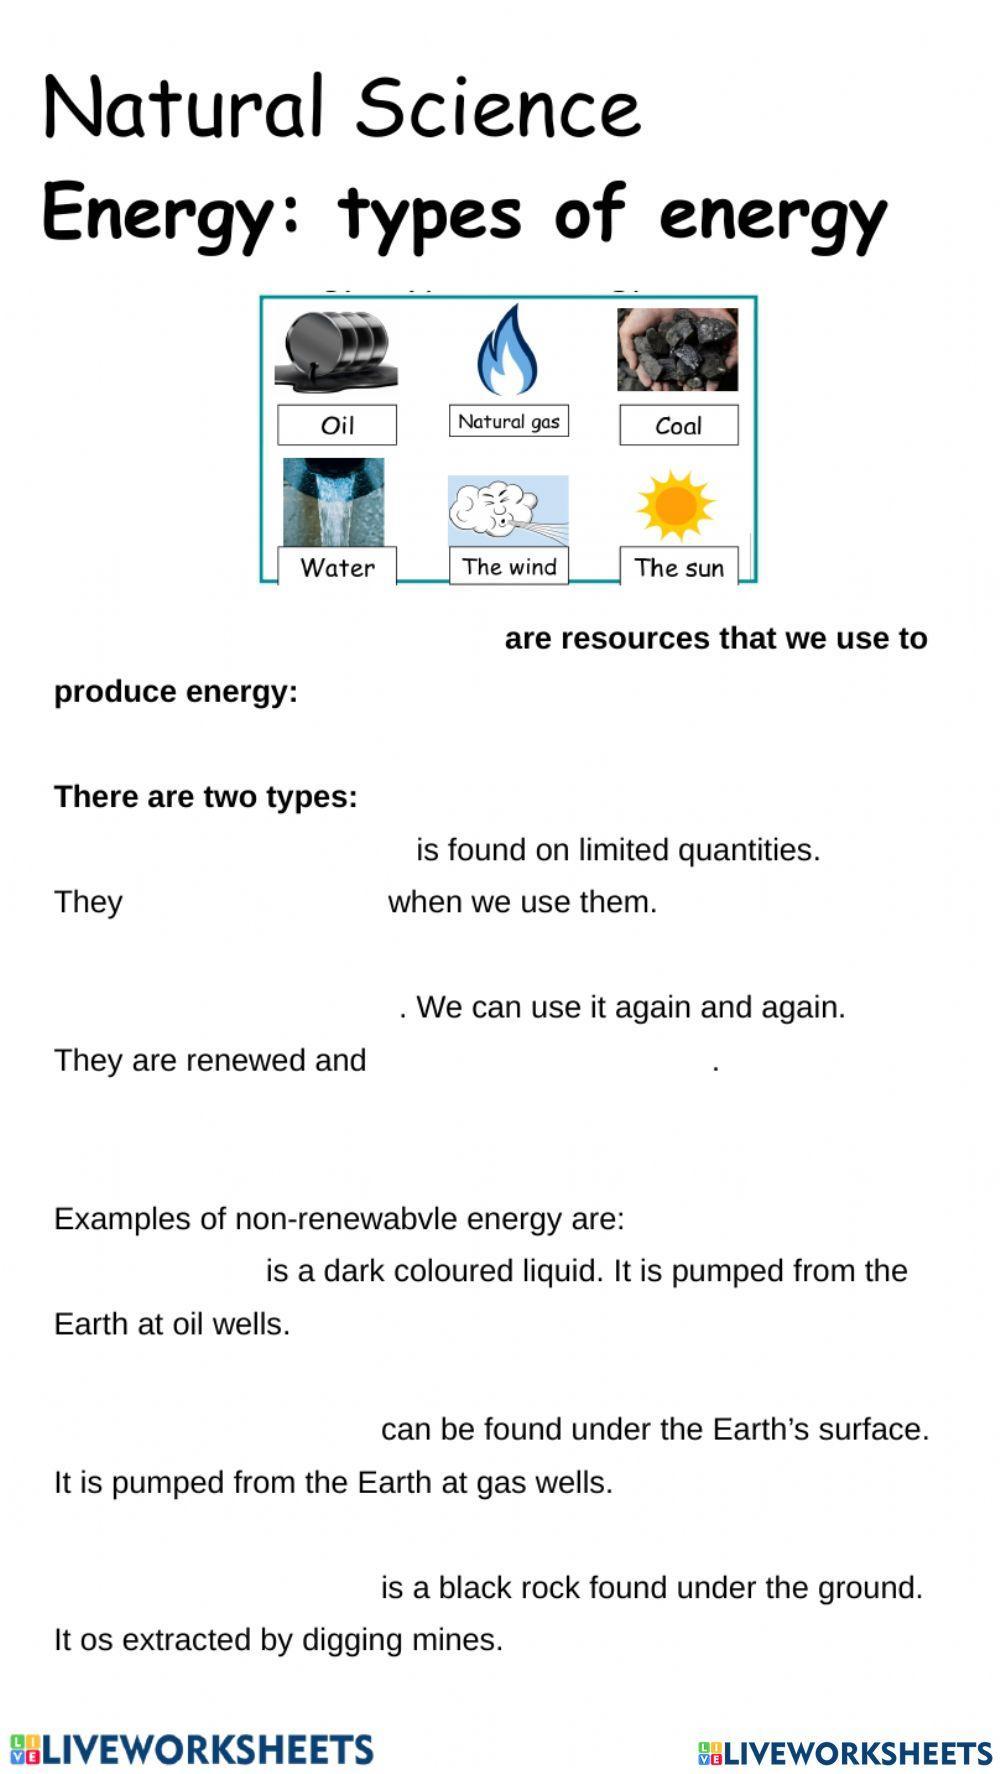 Types of energy sources